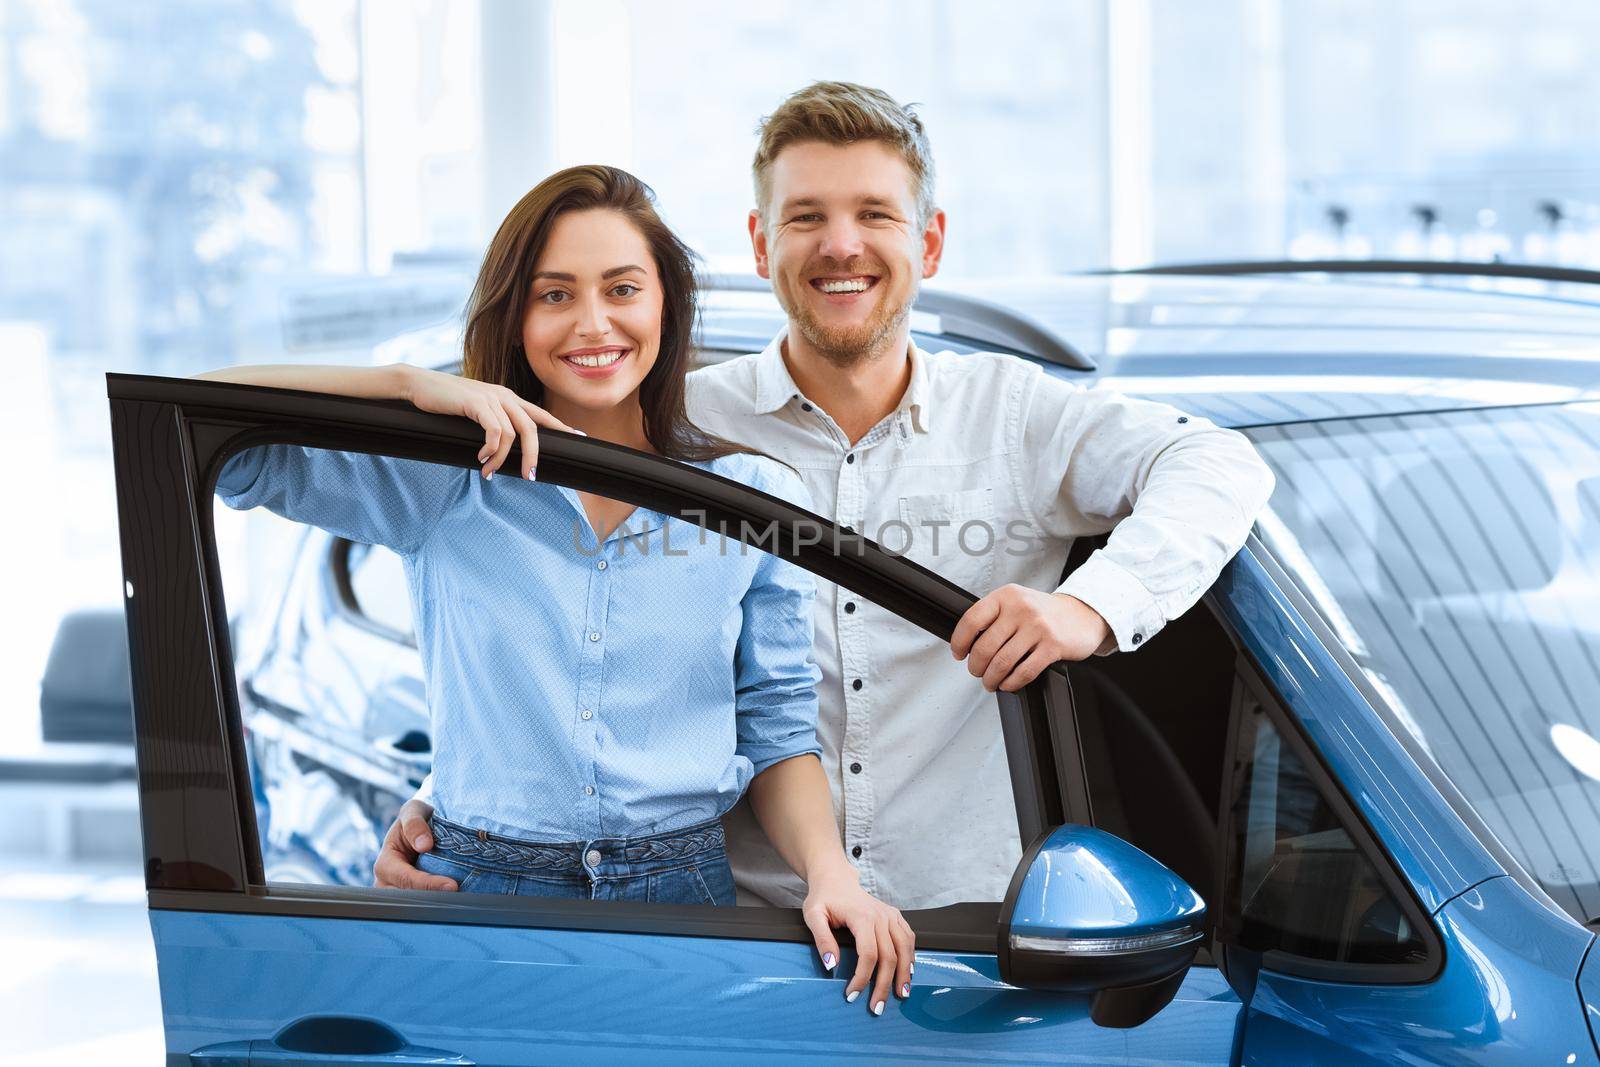 Perfect family car. Shot of a beautiful happy couple posing together behind an open door of a new car they just bought at the dealership smiling to the camera joyfully